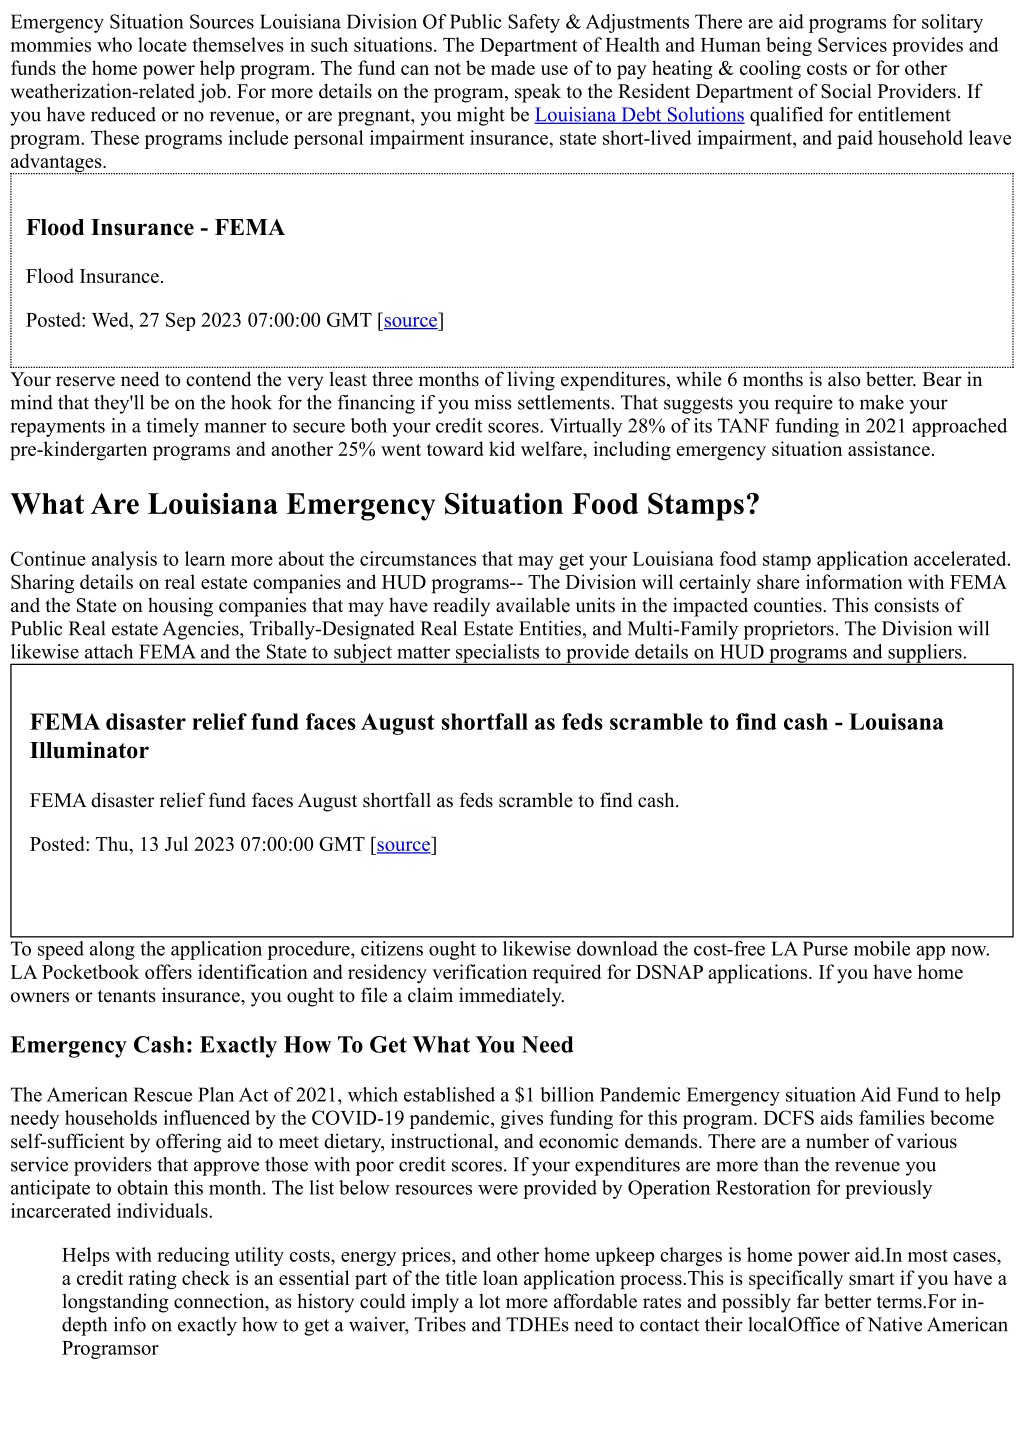 emergency situation sources louisiana division l